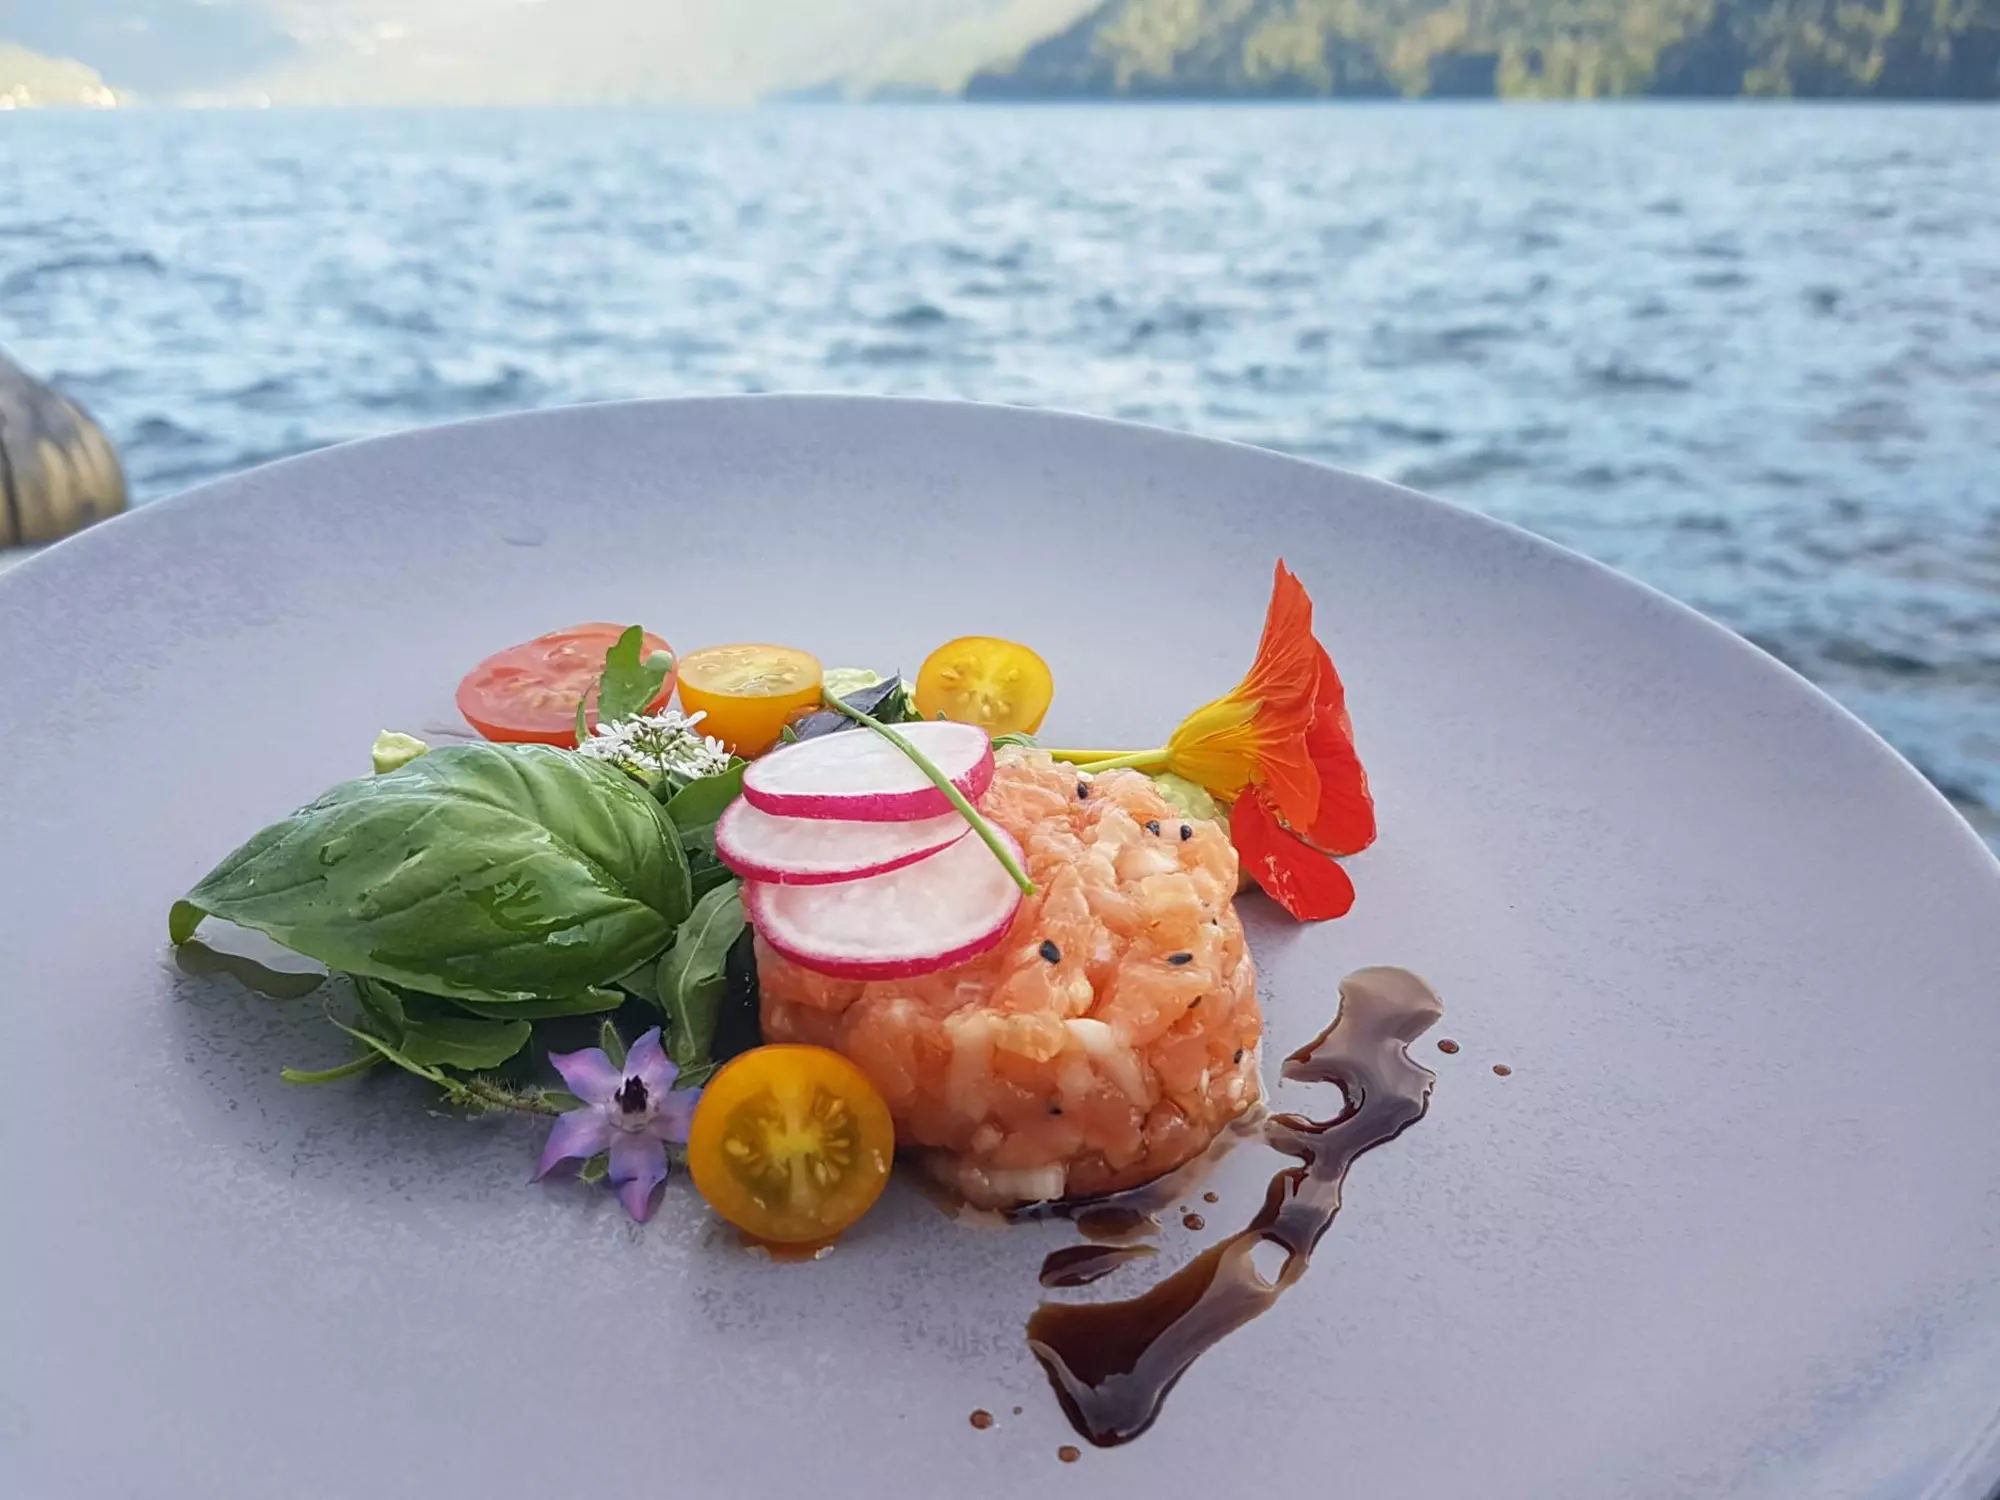 On the shore of Millstätter See, Restaurant See-Villa: Fish tartare with garnish of leaf salads and cherry tomatoes, served on a white plate with Millstätter See in the background.